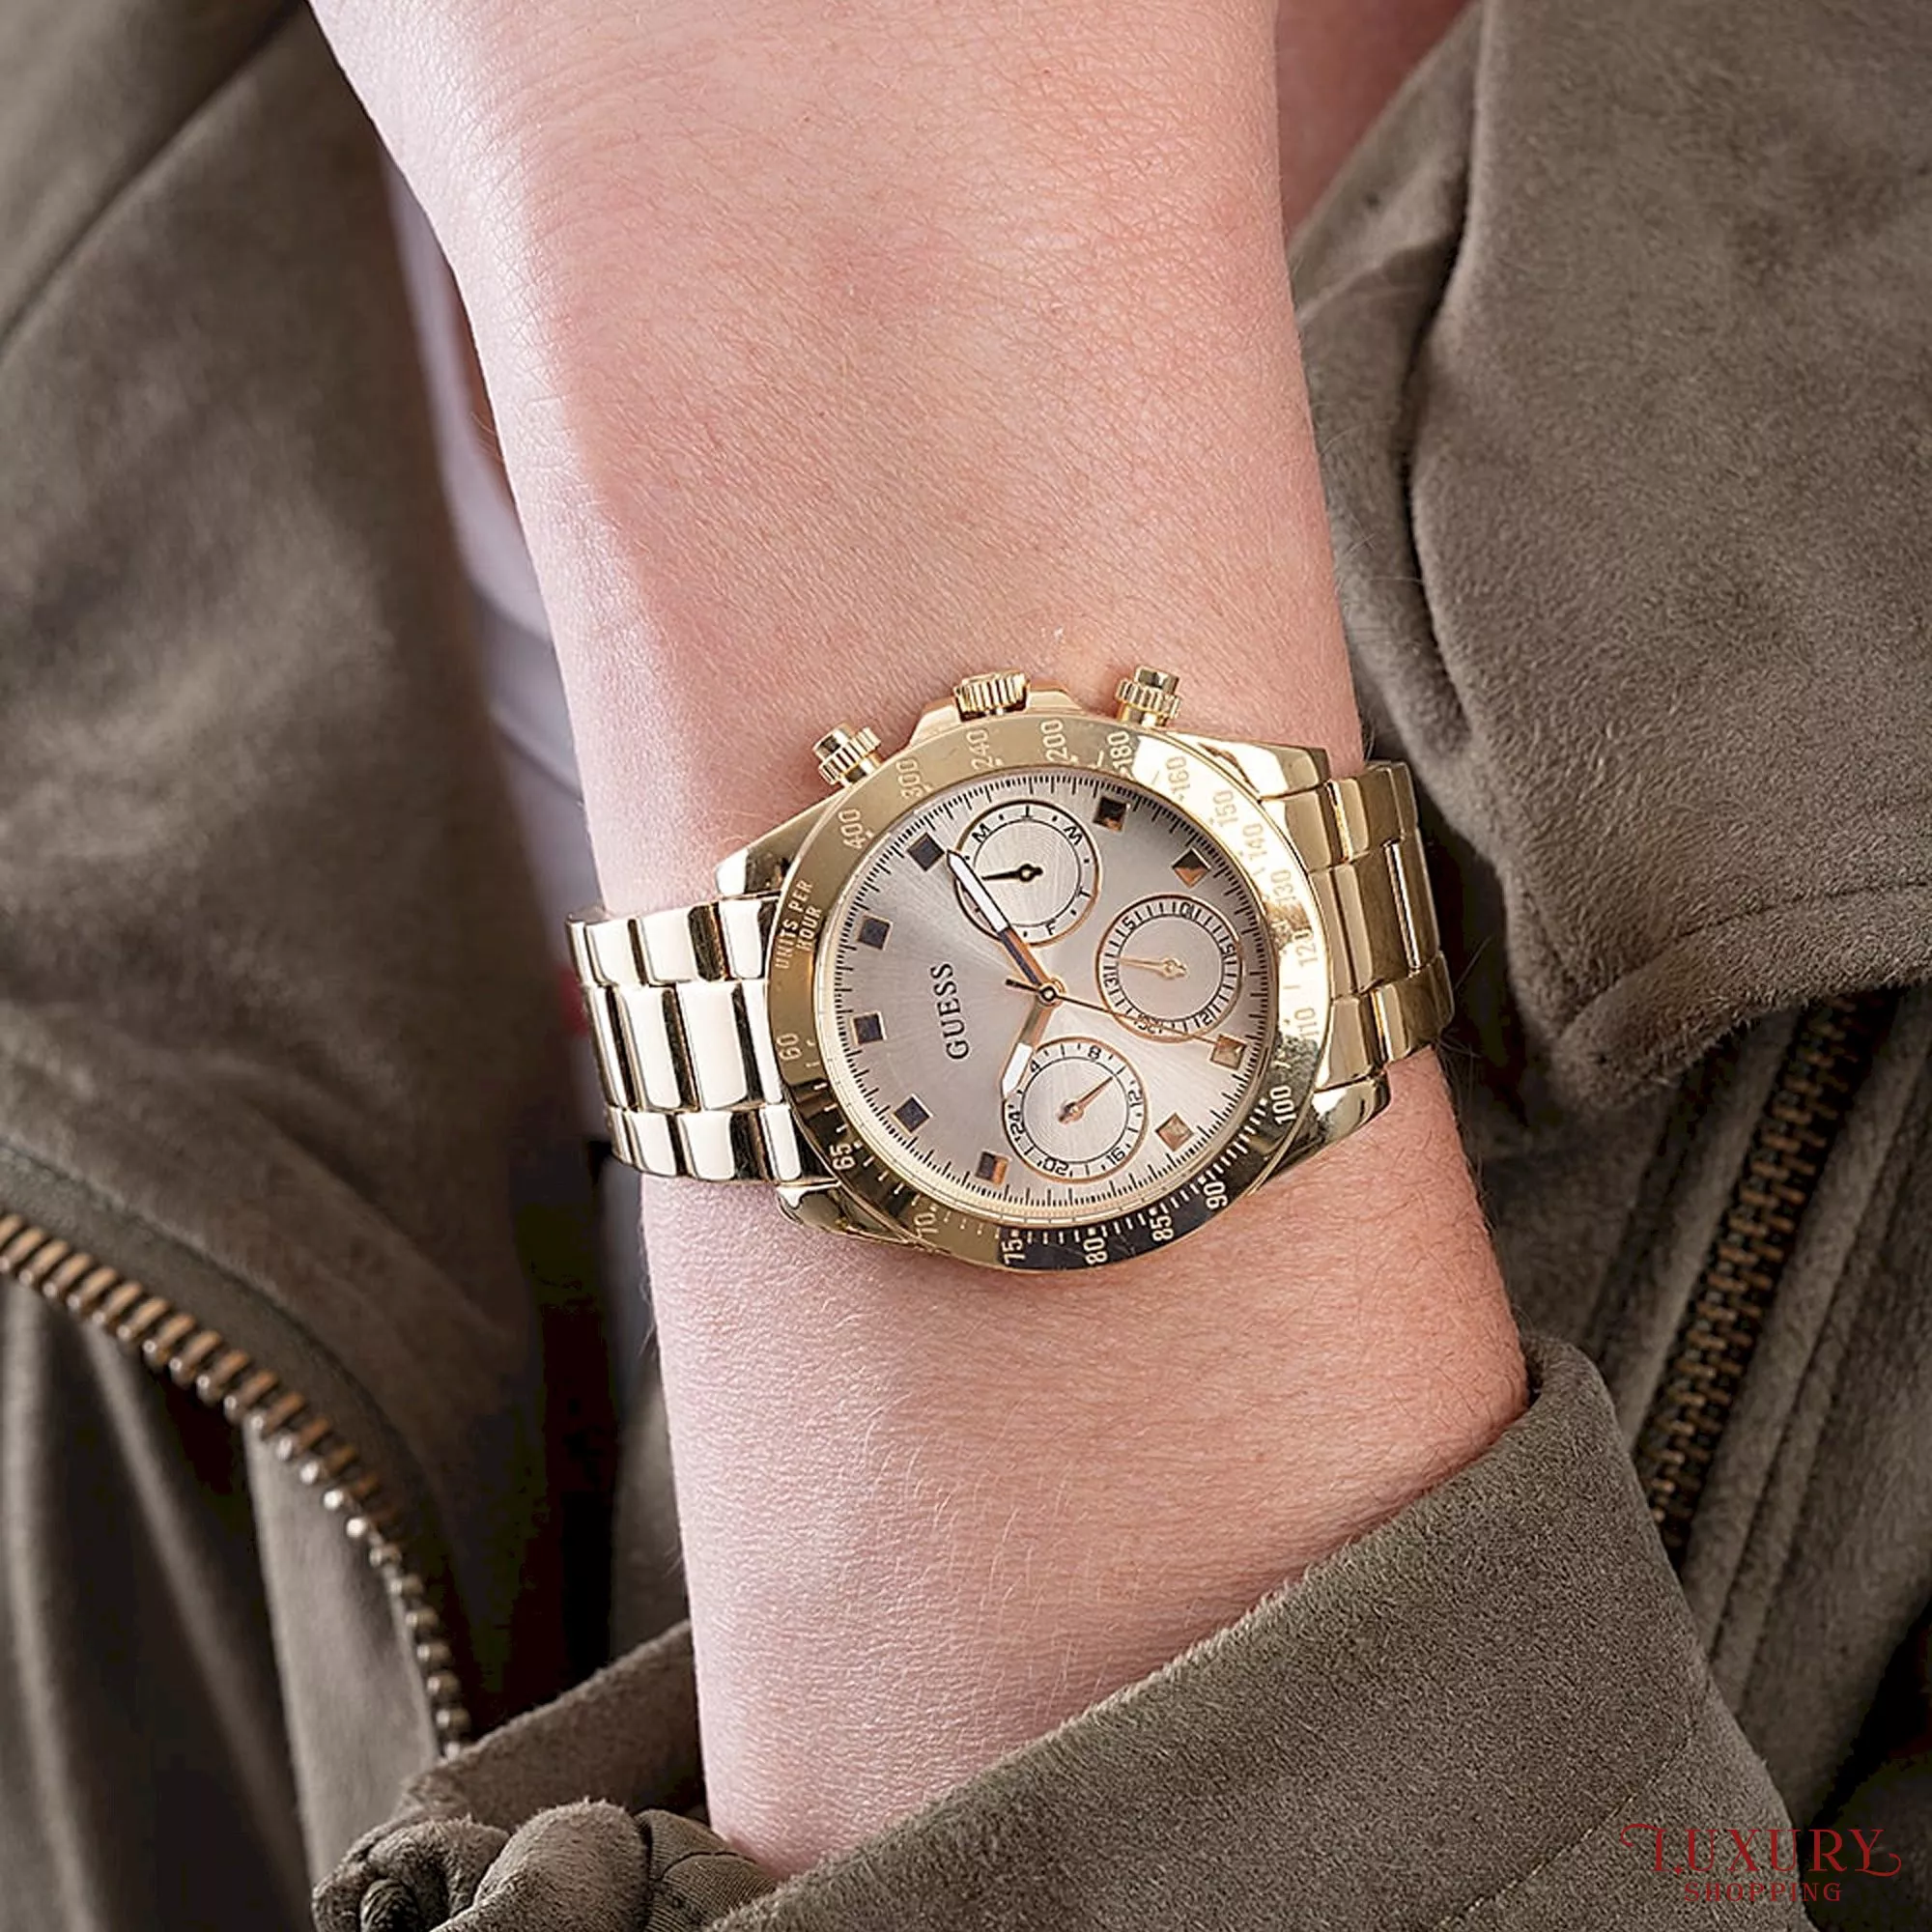 Guess Gold-Tone Multifunction Watch 38MM